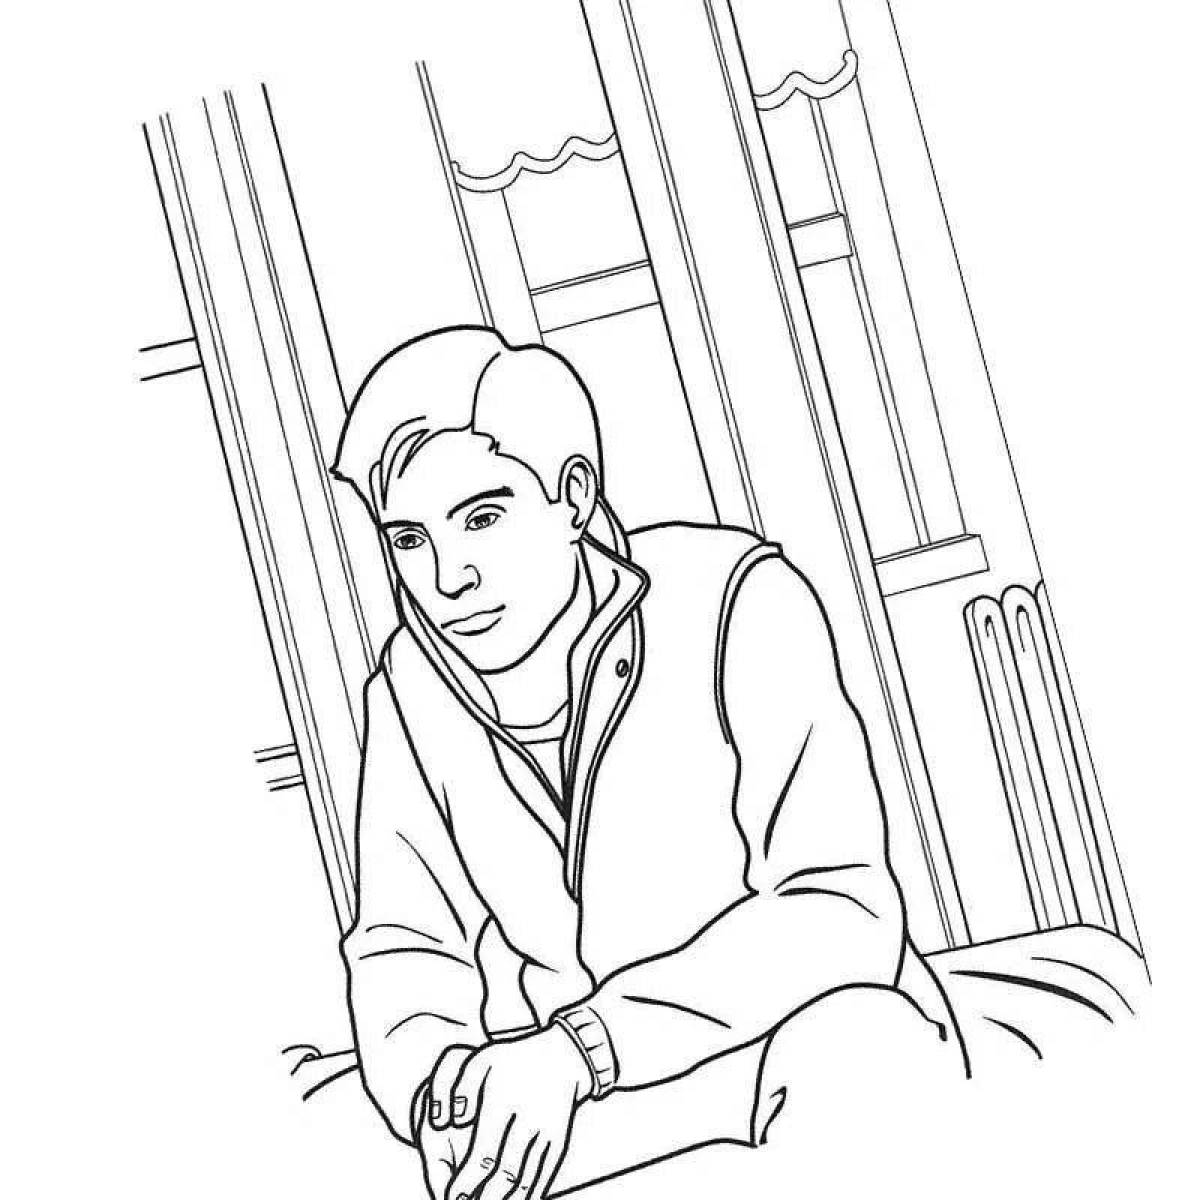 Peter parker's exciting coloring book